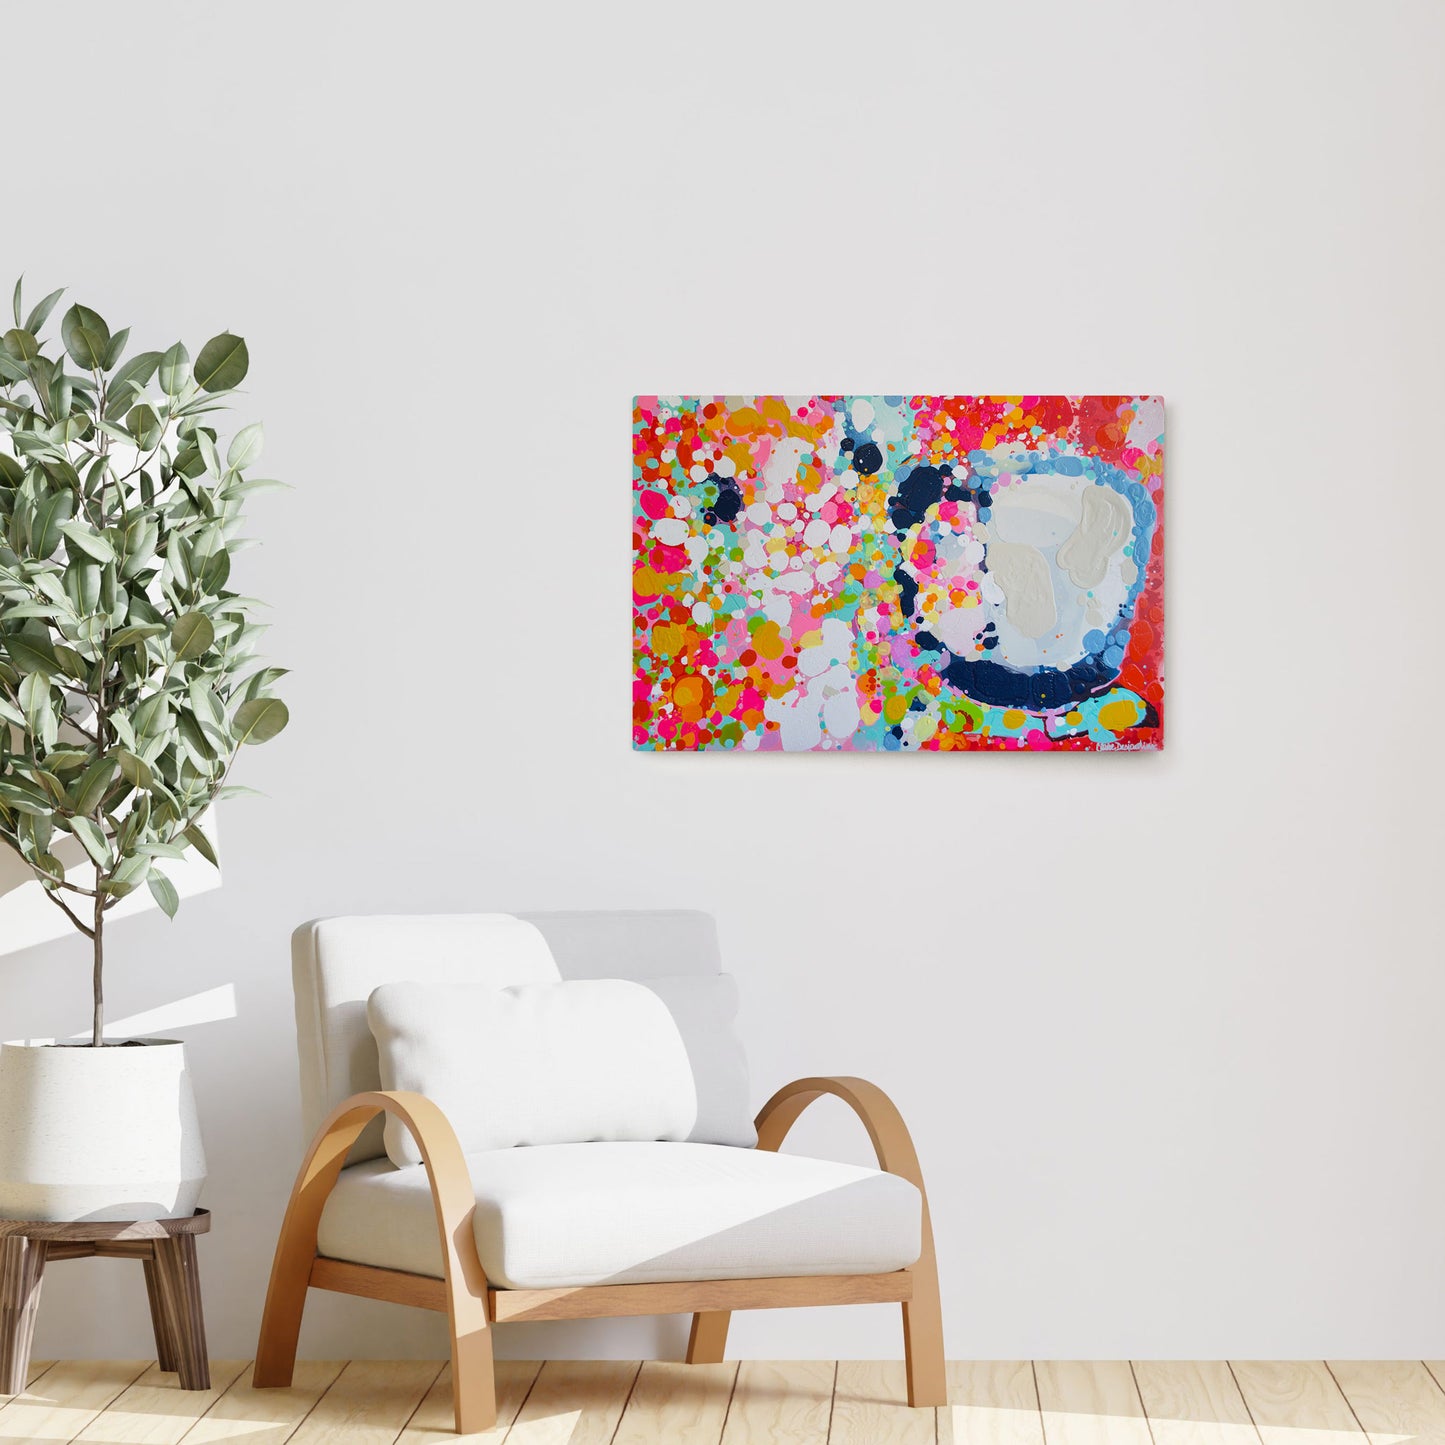 Claire Desjardins' How to Bake a Cake painting reproduced on HD metal print and displayed on wall